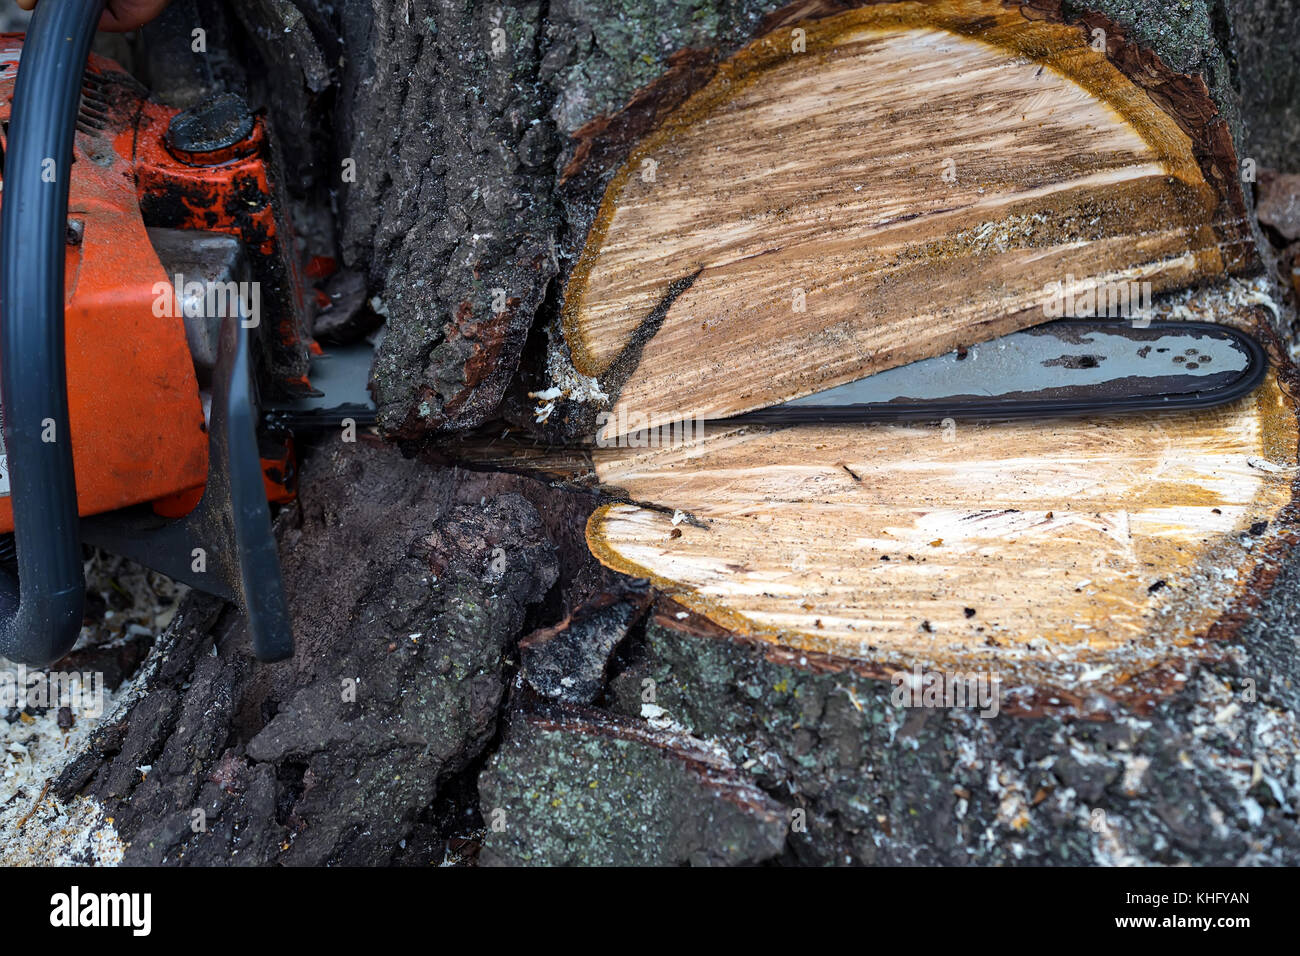 Sawing tree with chainsaw close up Stock Photo